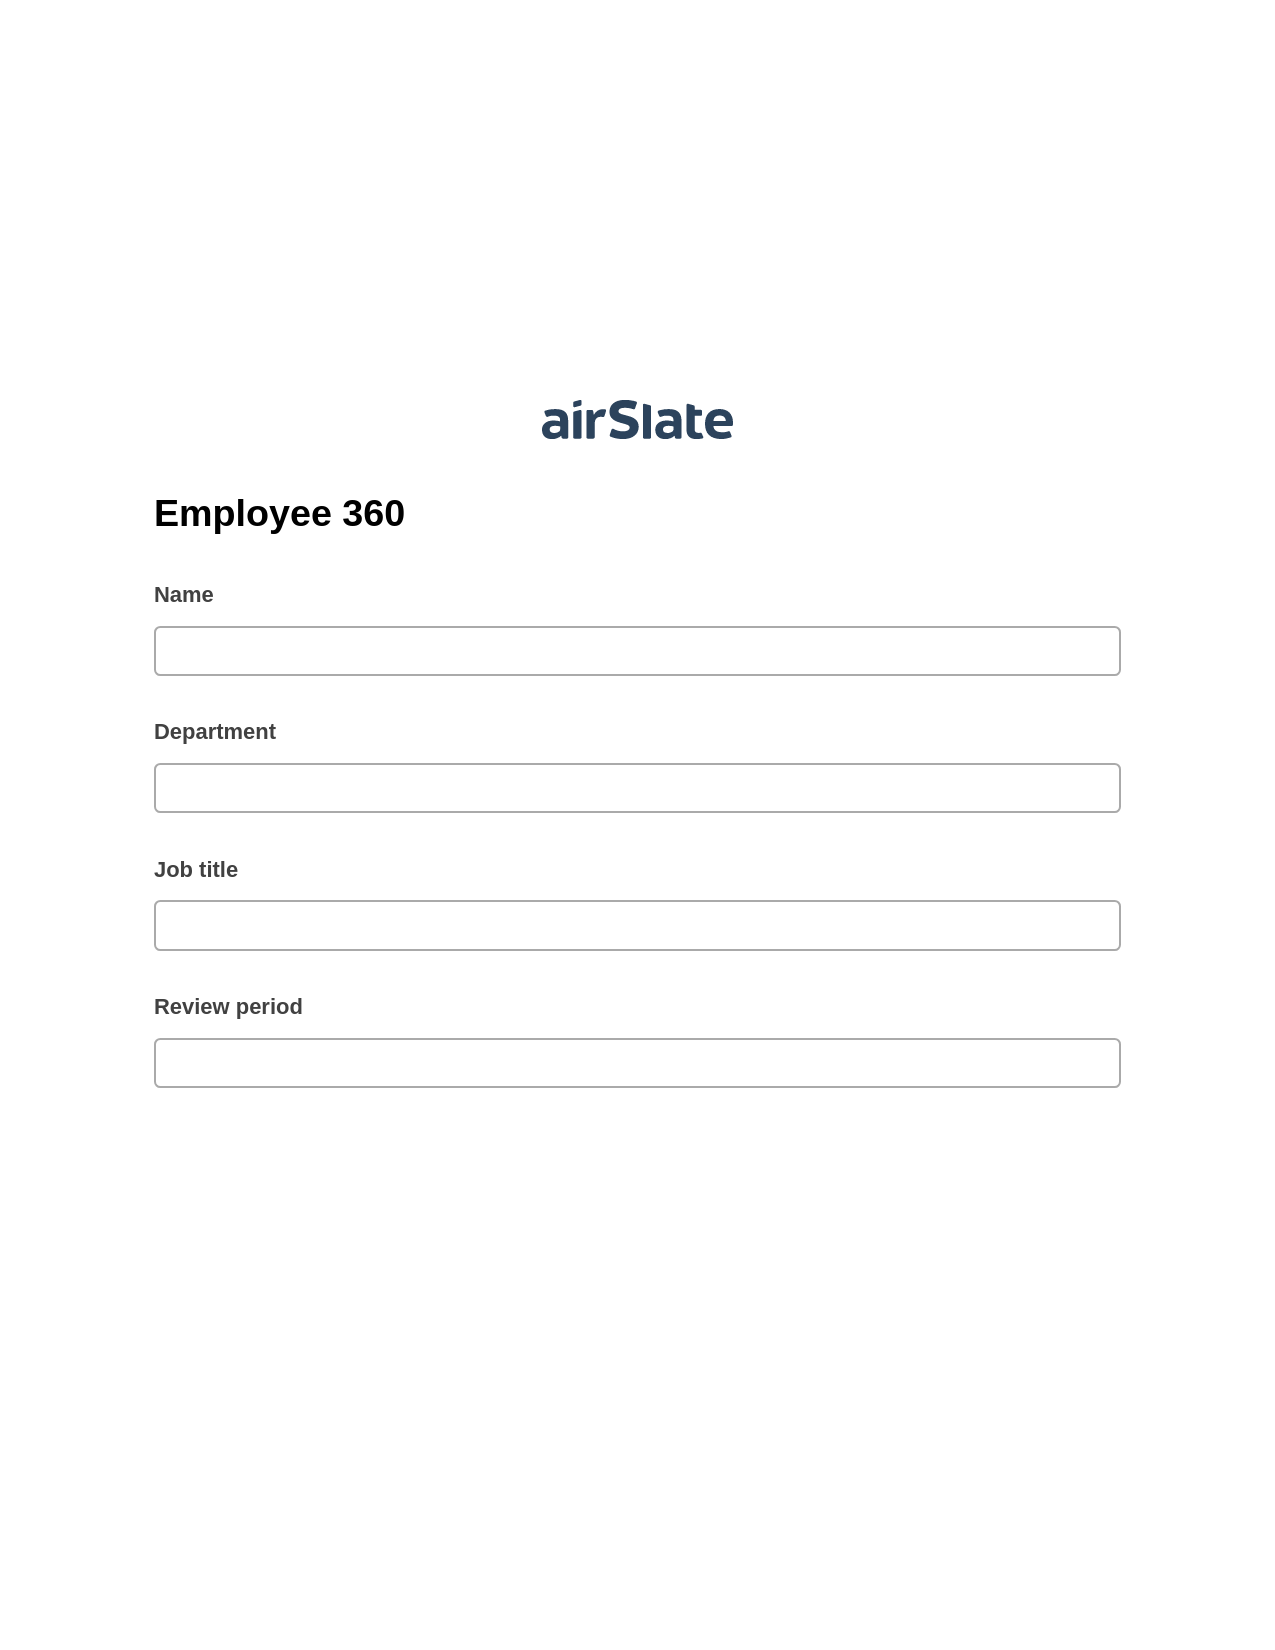 Employee 360 Pre-fill from Salesforce Records Bot, Google Cloud Print Bot, Archive to Dropbox Bot